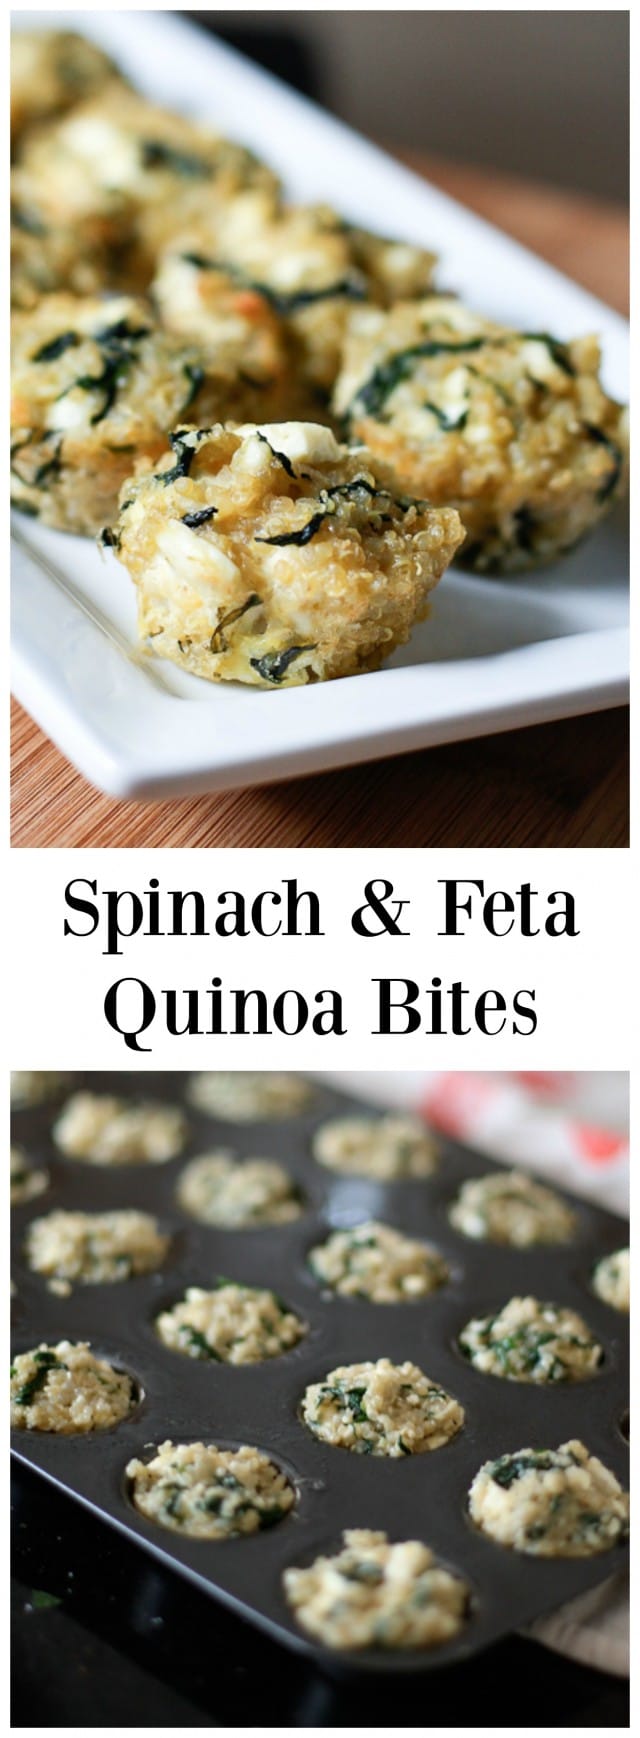 These little bite sized snacks are addictive! Full of all of your favorite ingredients and flavors - spinach, feta and quinoa - all in one bite!